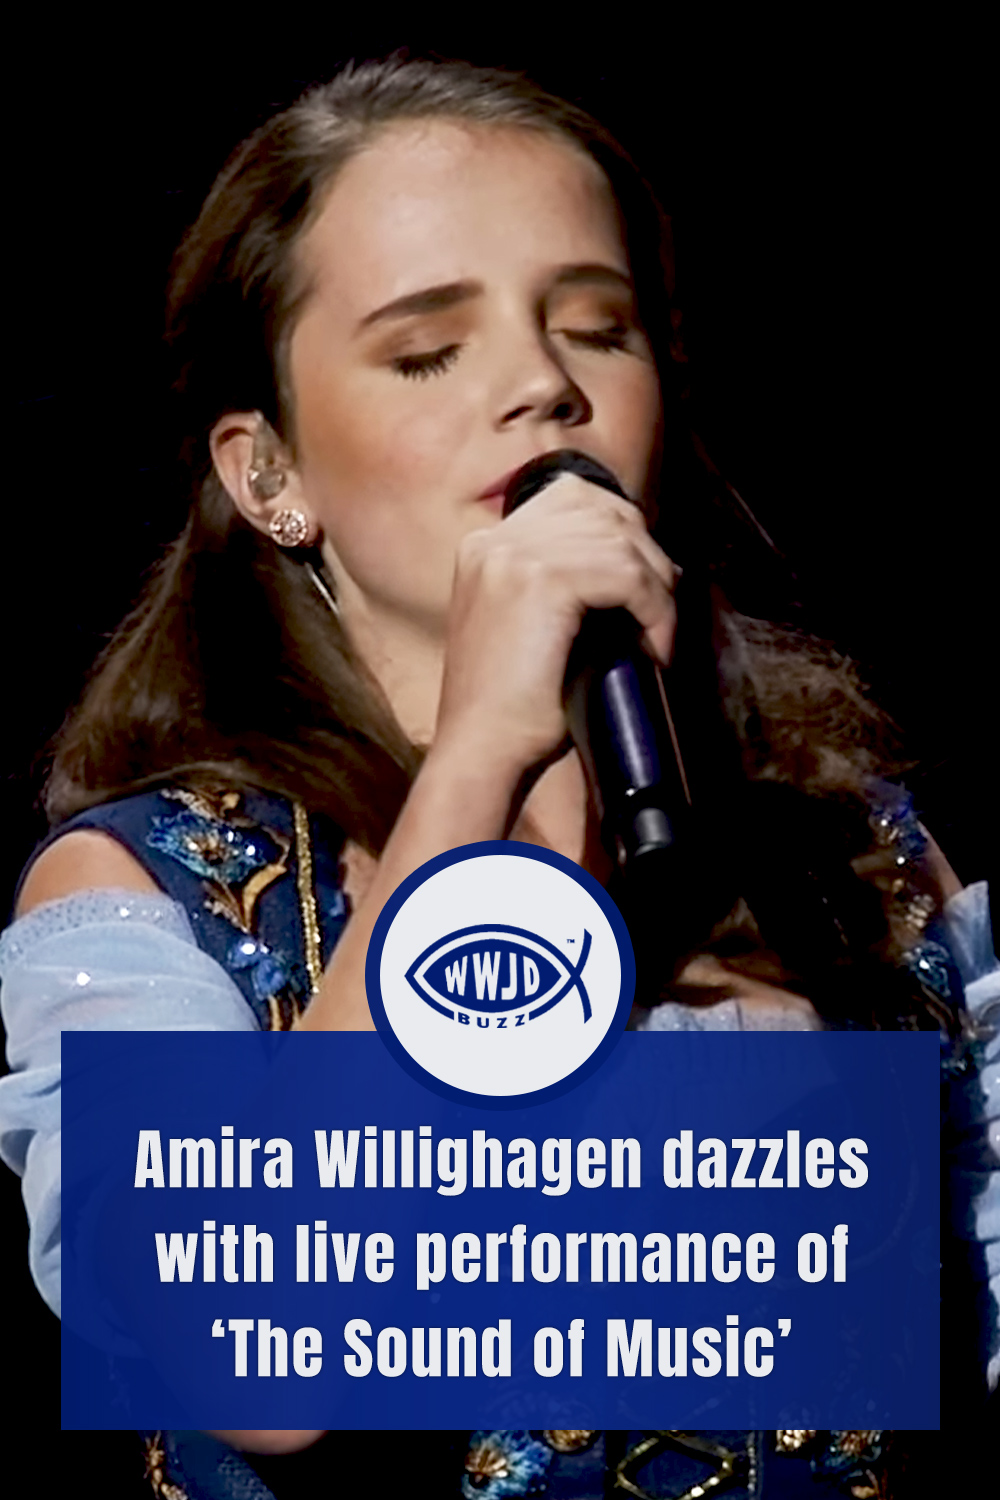 Amira Willighagen dazzles with live performance of ‘The Sound of Music’